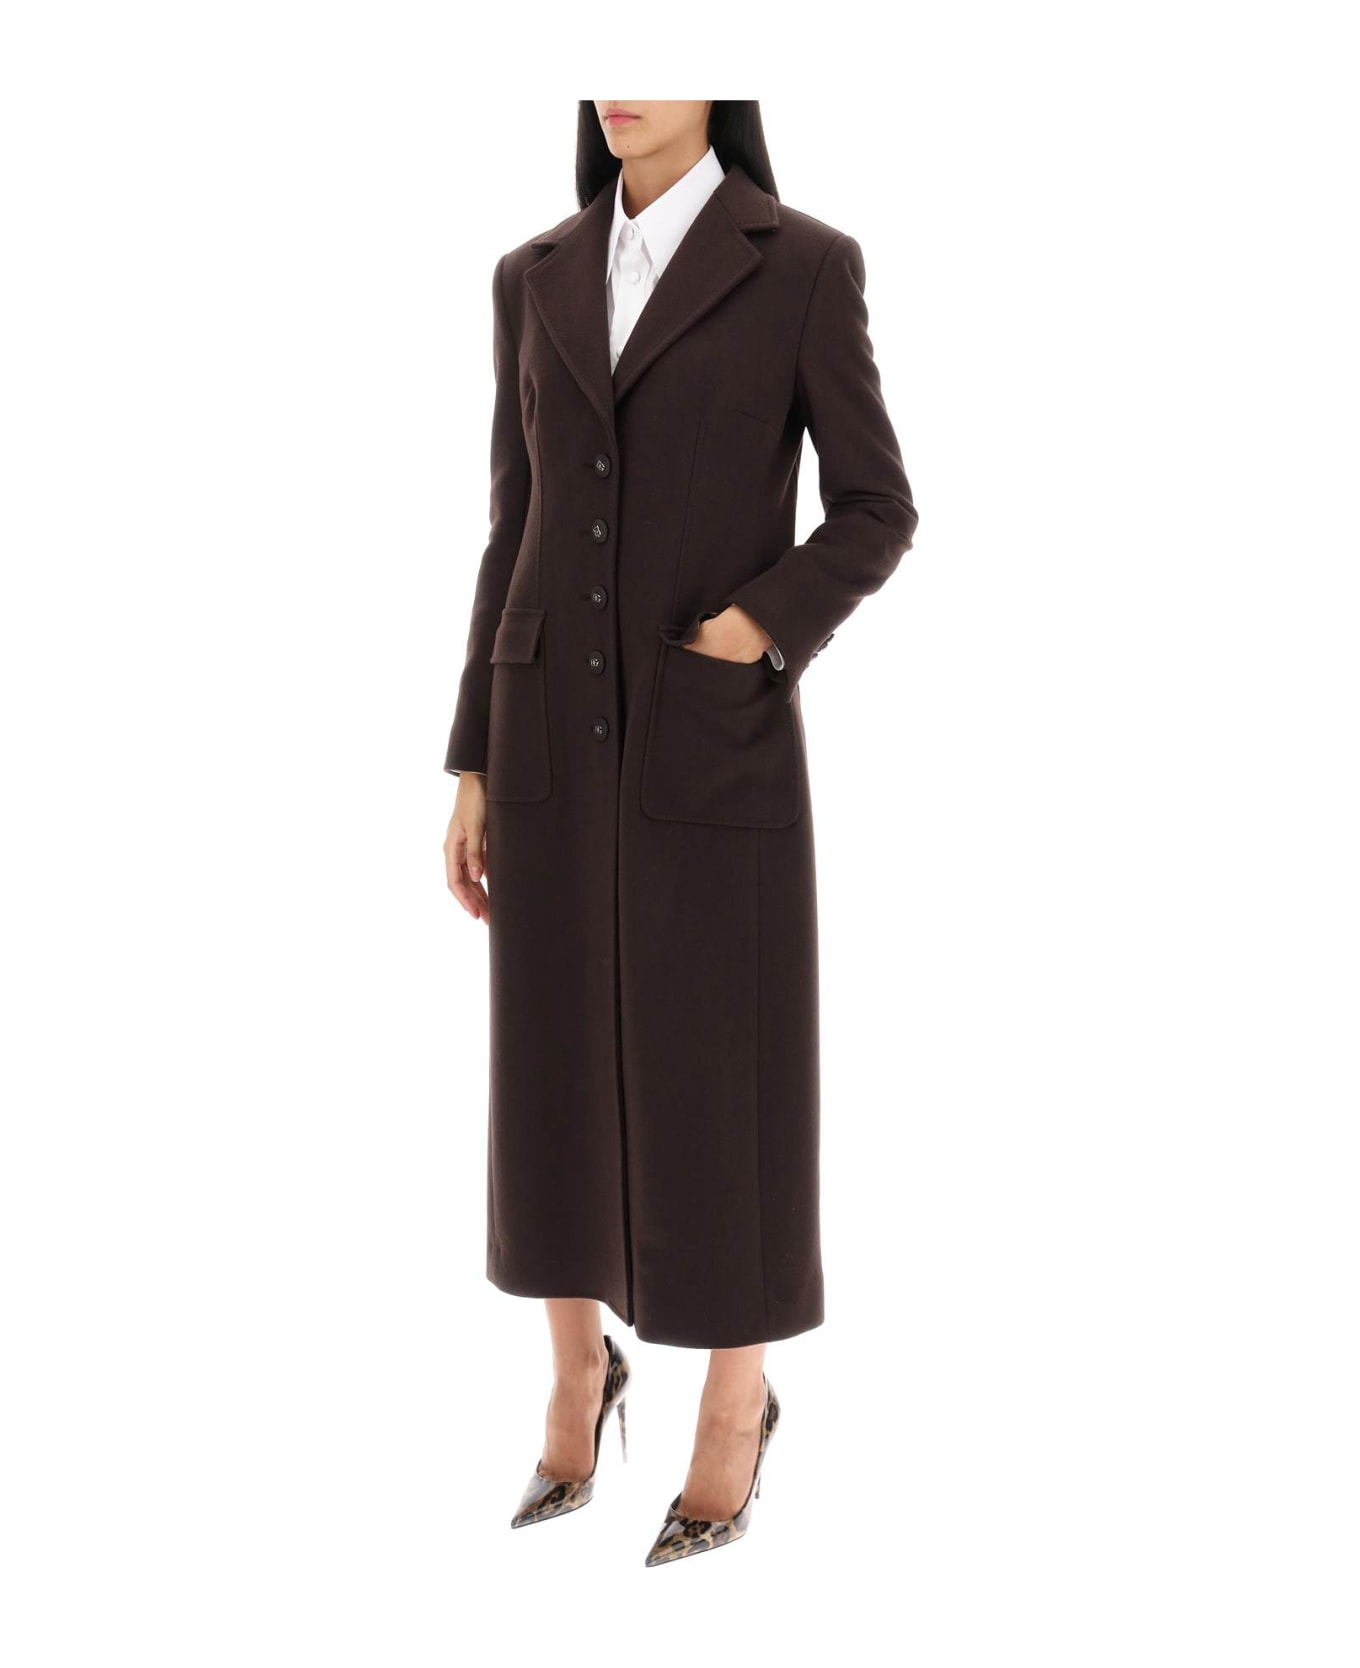 Dolce & Gabbana Shaped Coat In Wool And Cashmere - Marrone Scuro 4 コート